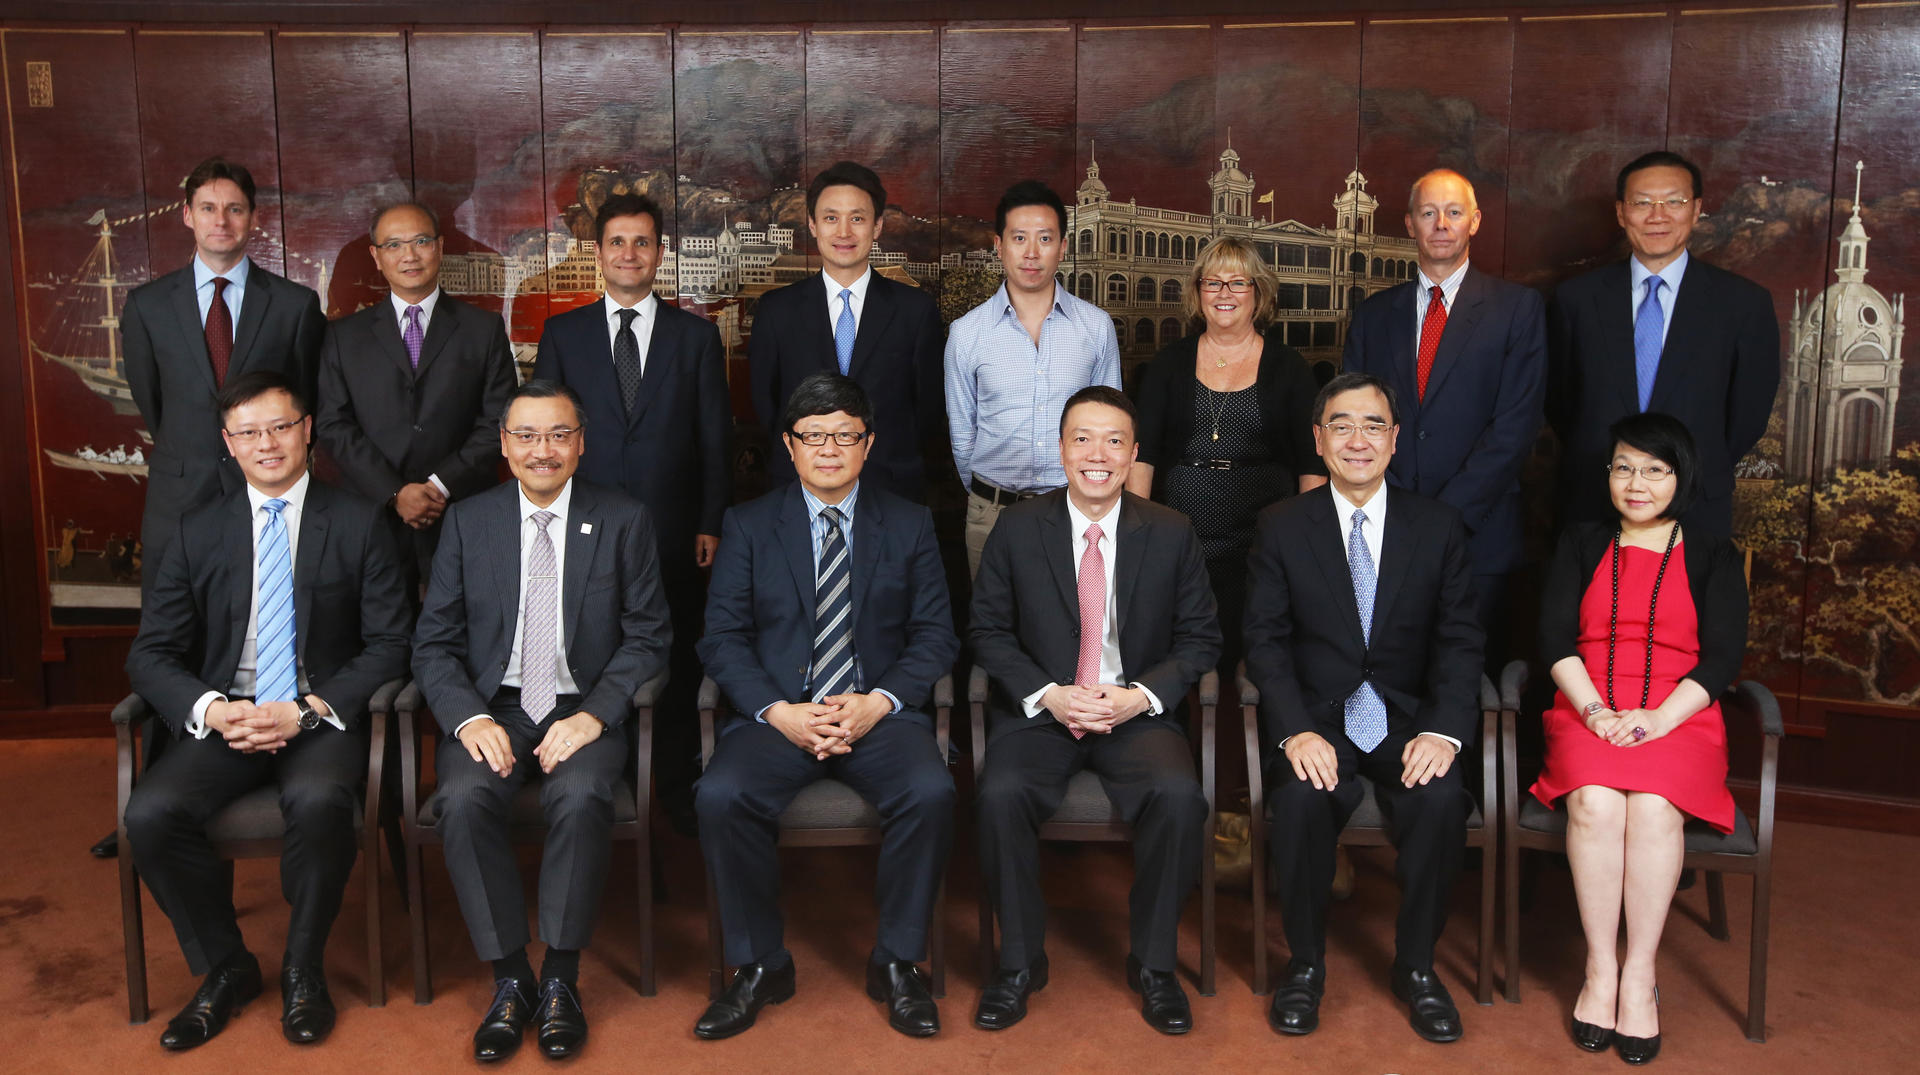 (Front row, from left) Johnny Kwan, the national president of Junior Chamber International Hong Kong; Ronald Yam, the divisional president for Greater China at CPA Australia; Robin Hu, the chief executive of SCMP Group; Ken Lee, the head of commercial for Asia-Pacific and managing director for Hong Kong and Macau at DHL Express; Richard Wong, professor of economics at the University of Hong Kong; Janice Choi of the Chinese General Chamber of Commerce; (back row, from left) Nick Edwards, the business editor of the SCMP; Raymond Lee, the managing director of strategy and business development at Citic Securities; Paul Salnikow, the chairman of the Executive Centre; Harold Wong, the managing director of Dah Sing Banking Group; Norman Lee, the managing director of Lee &amp; Man Chemical; Sally De Souza, the group public relations manager at Mandarin Oriental Hotel Group; Andrew Stokes, the managing director of ClarityEnglish; and Albert Chan, the head of commercial banking at HSBC. Photo: Sam Tsang